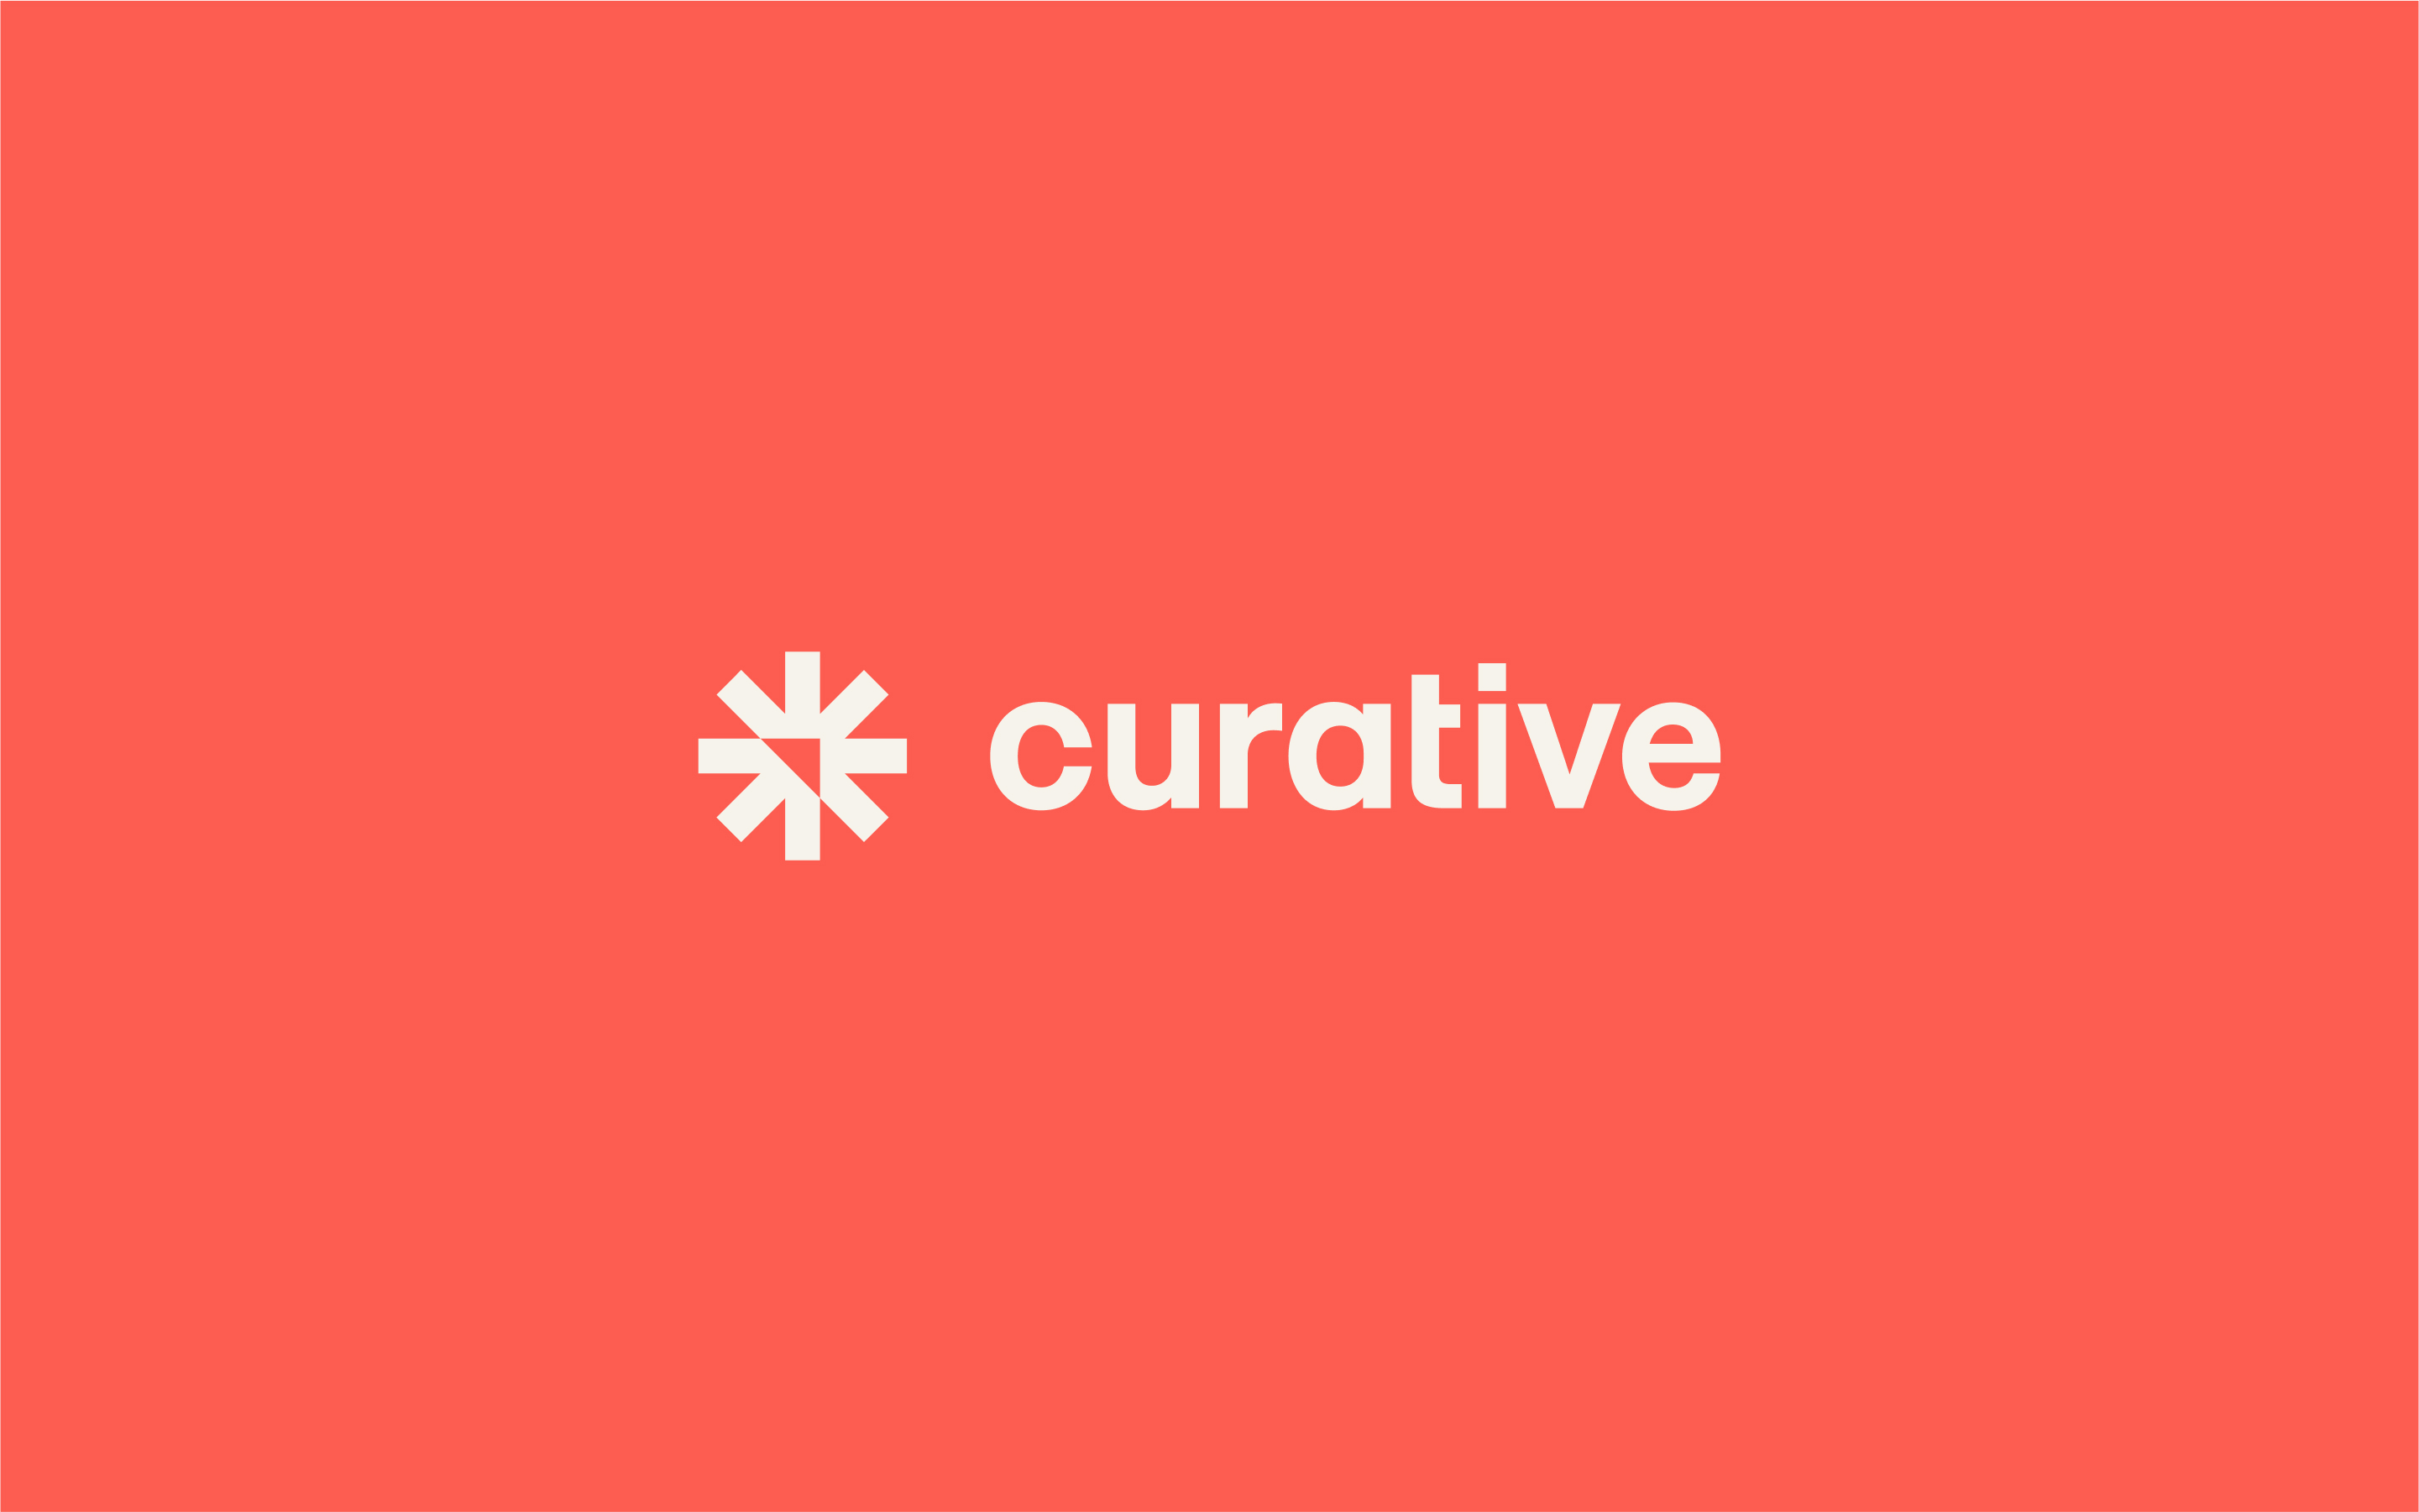 COVID-19 Startup Curative Rolls Out New Brand Identity by Landscape